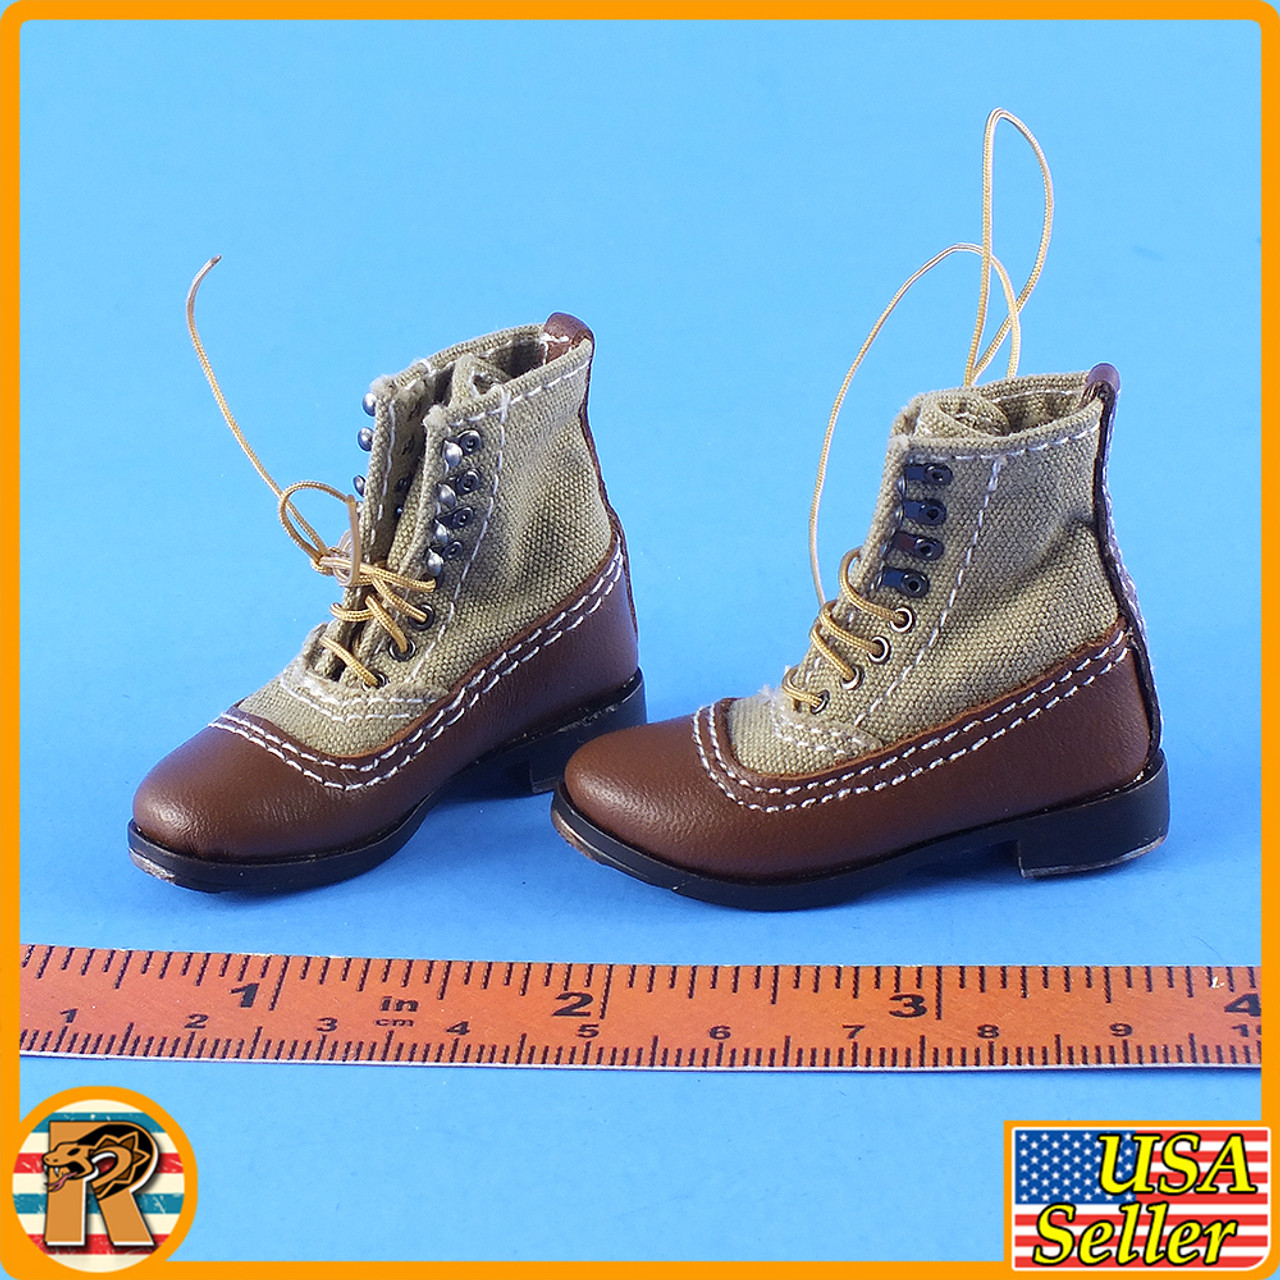 Burk Africa Corps - Boots (for Feet) - 1/6 Scale -